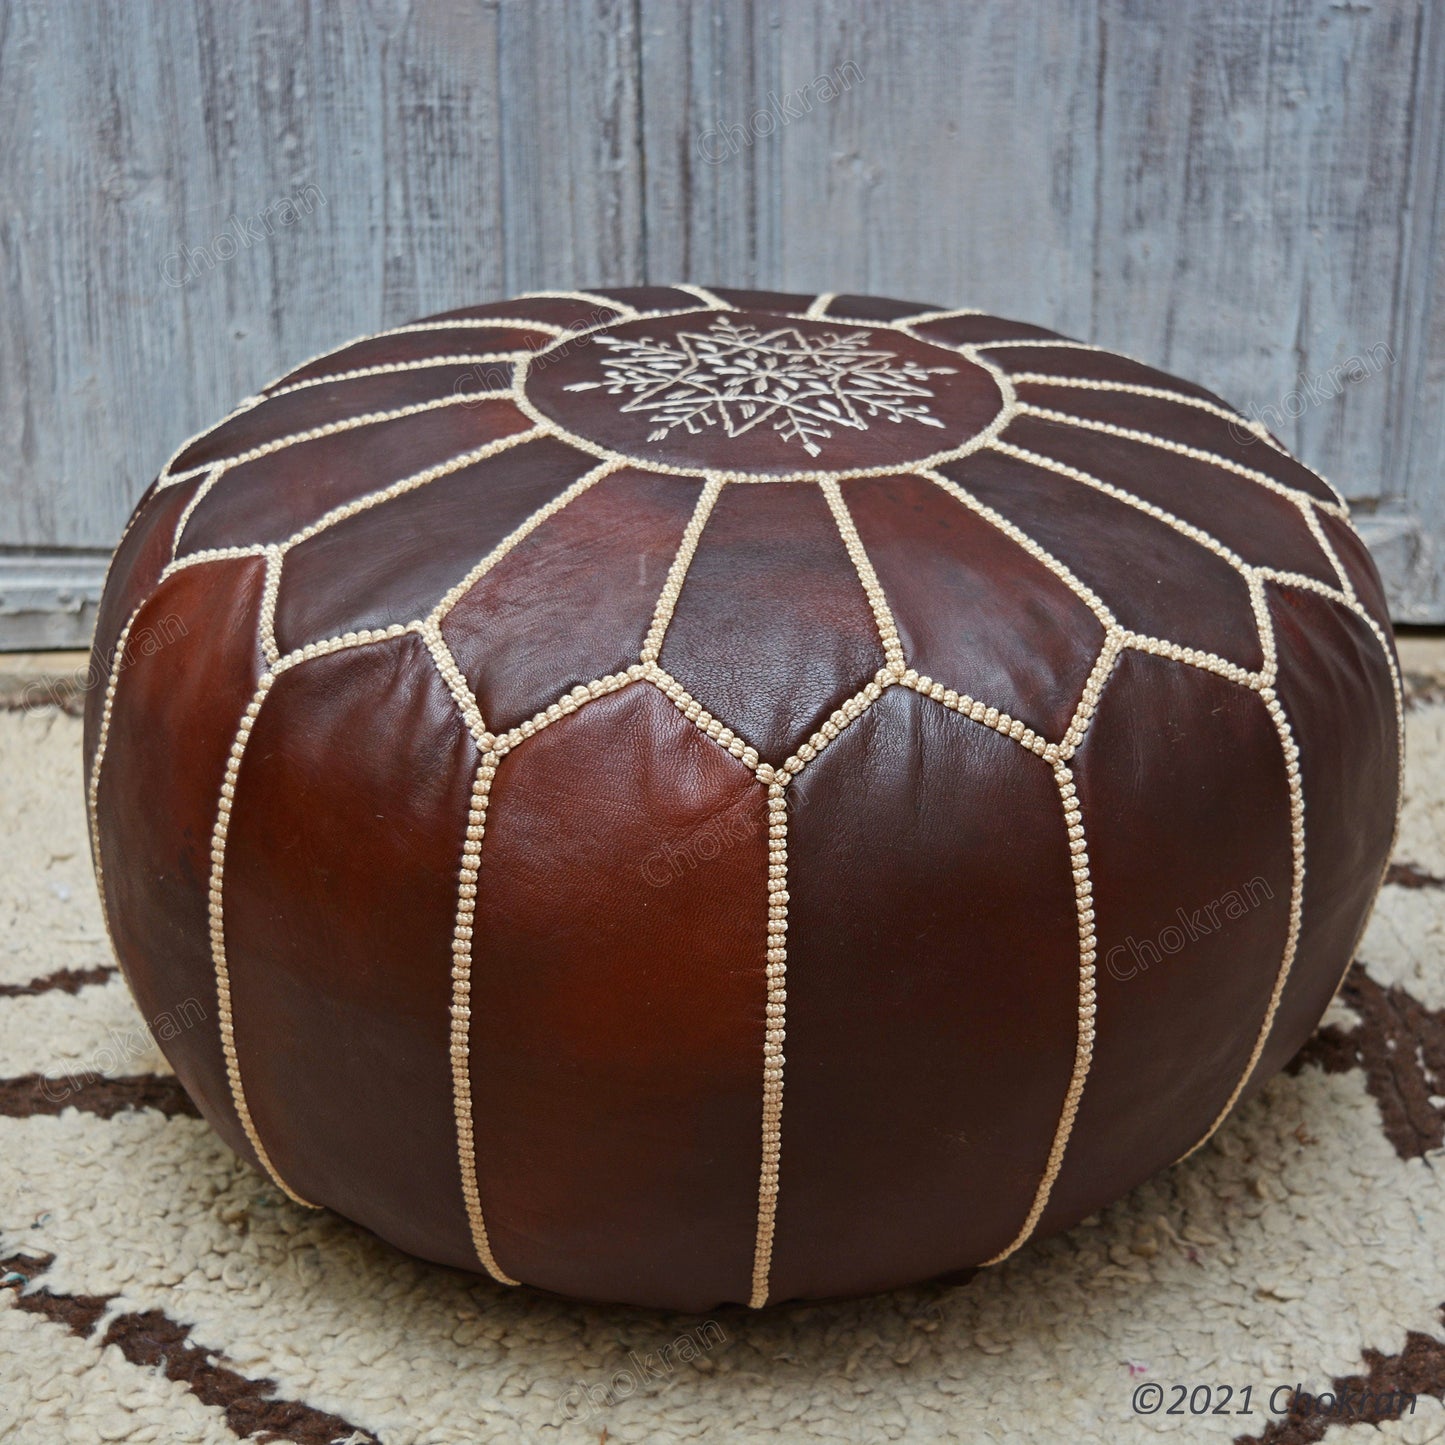 Dark brown Moroccan leather pouf, round leather ottoman, handmade leather pouf, Moroccan genuine leather footstool-UNSTUFFED